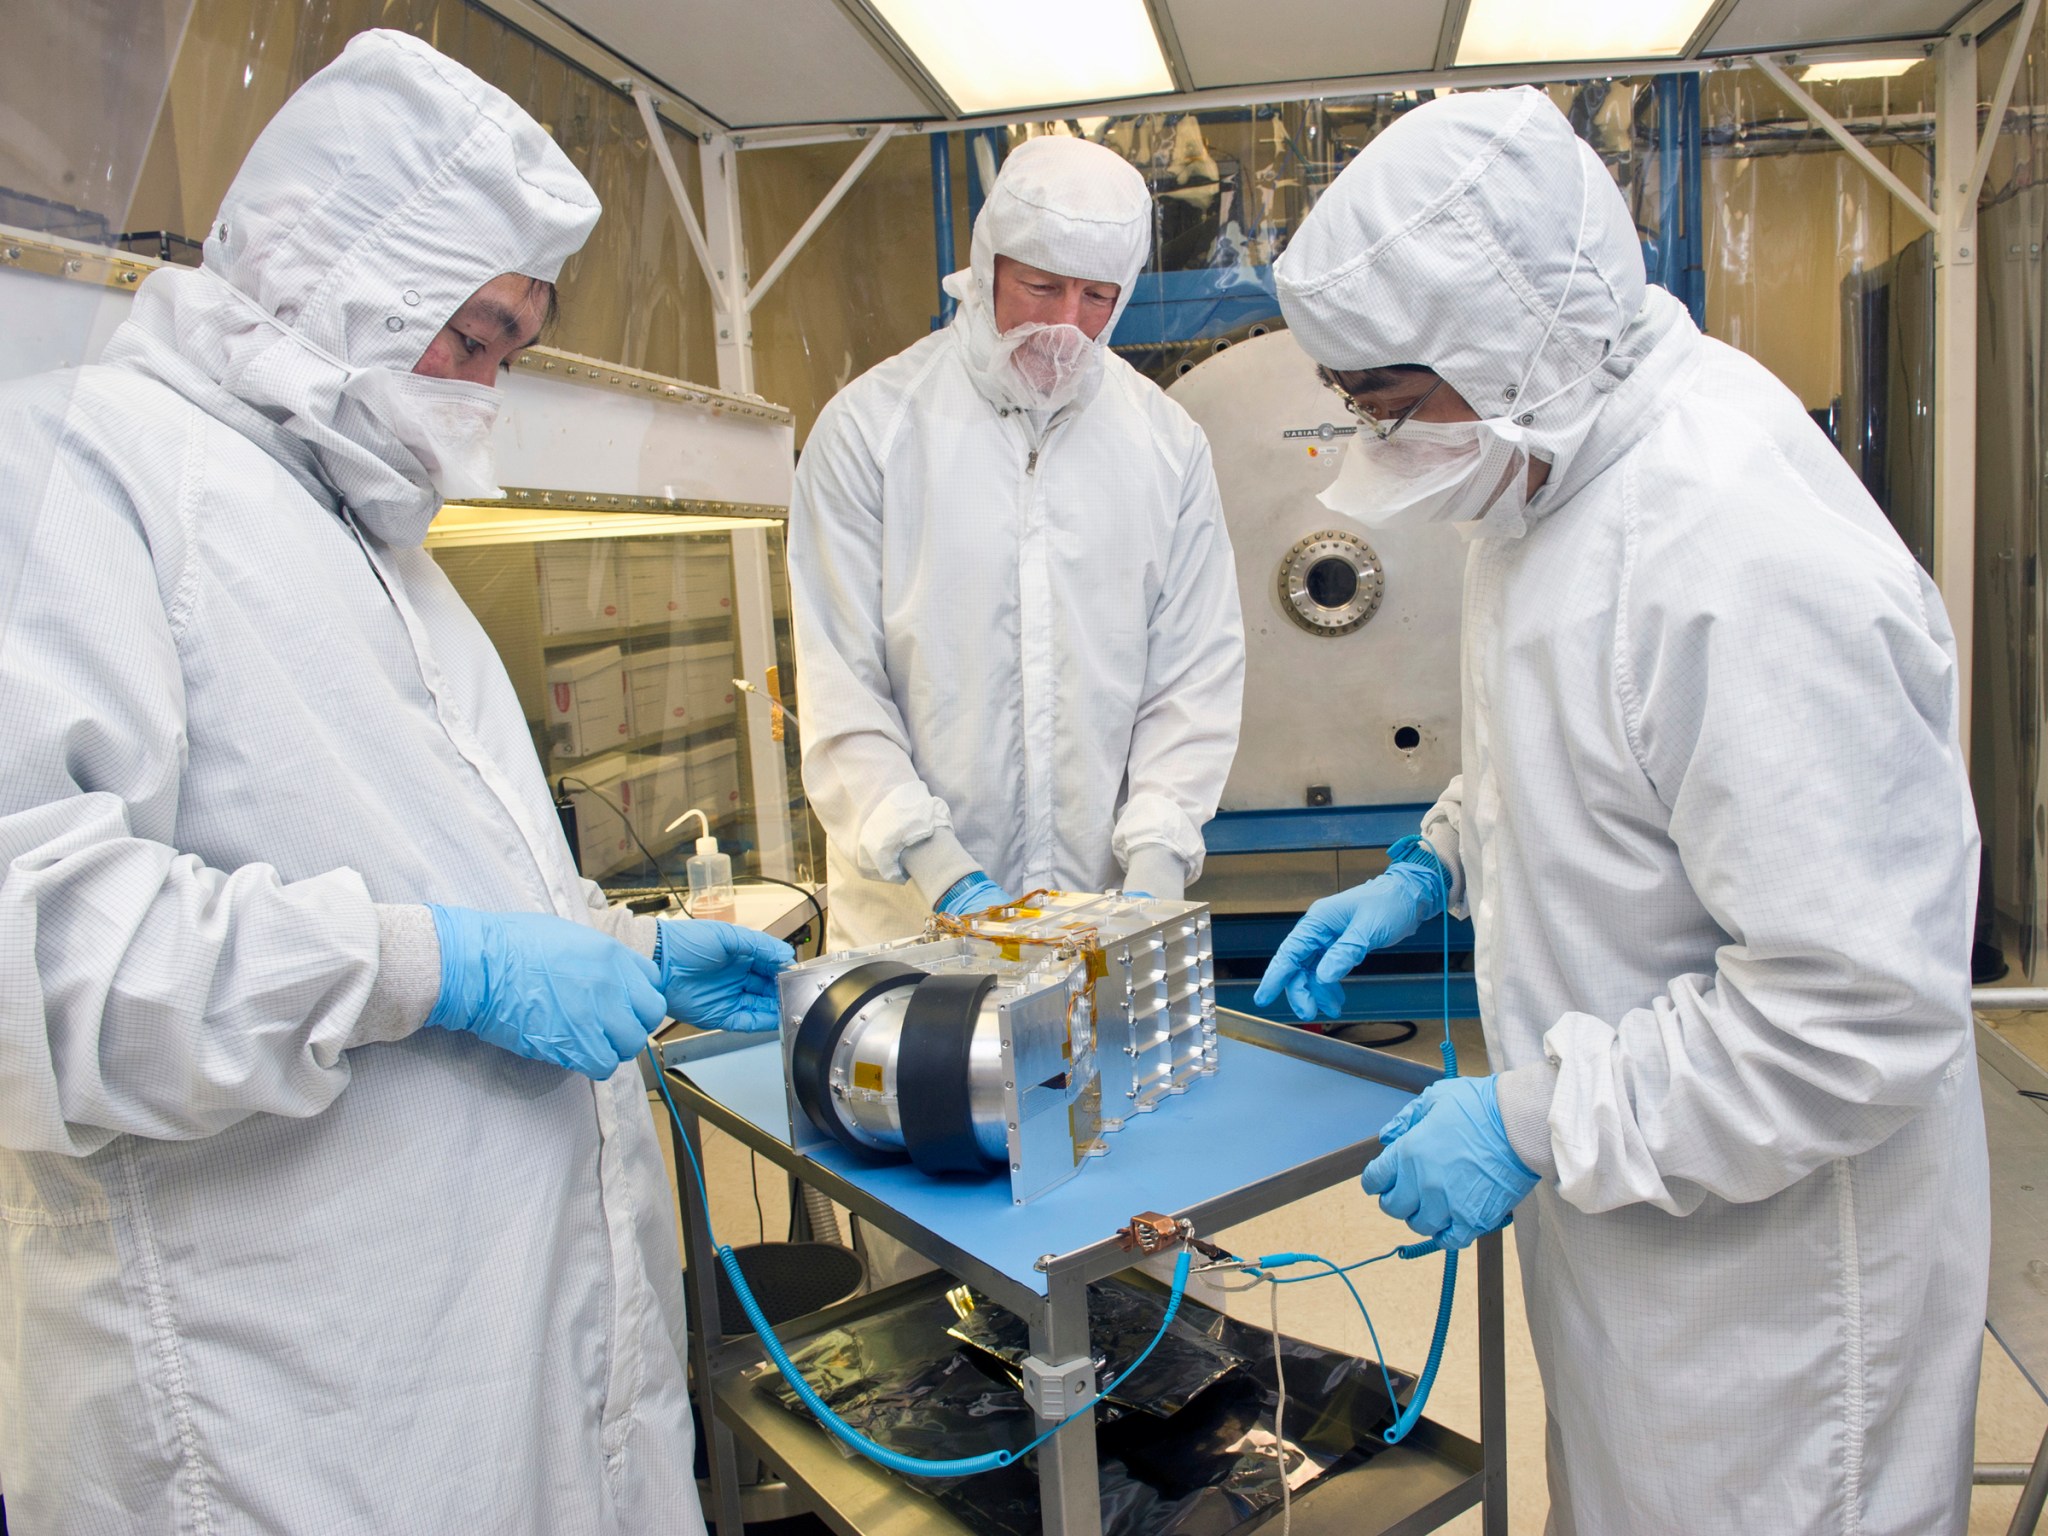 Three engineers dressed in white lab clothes prepare a spectrometer for tests